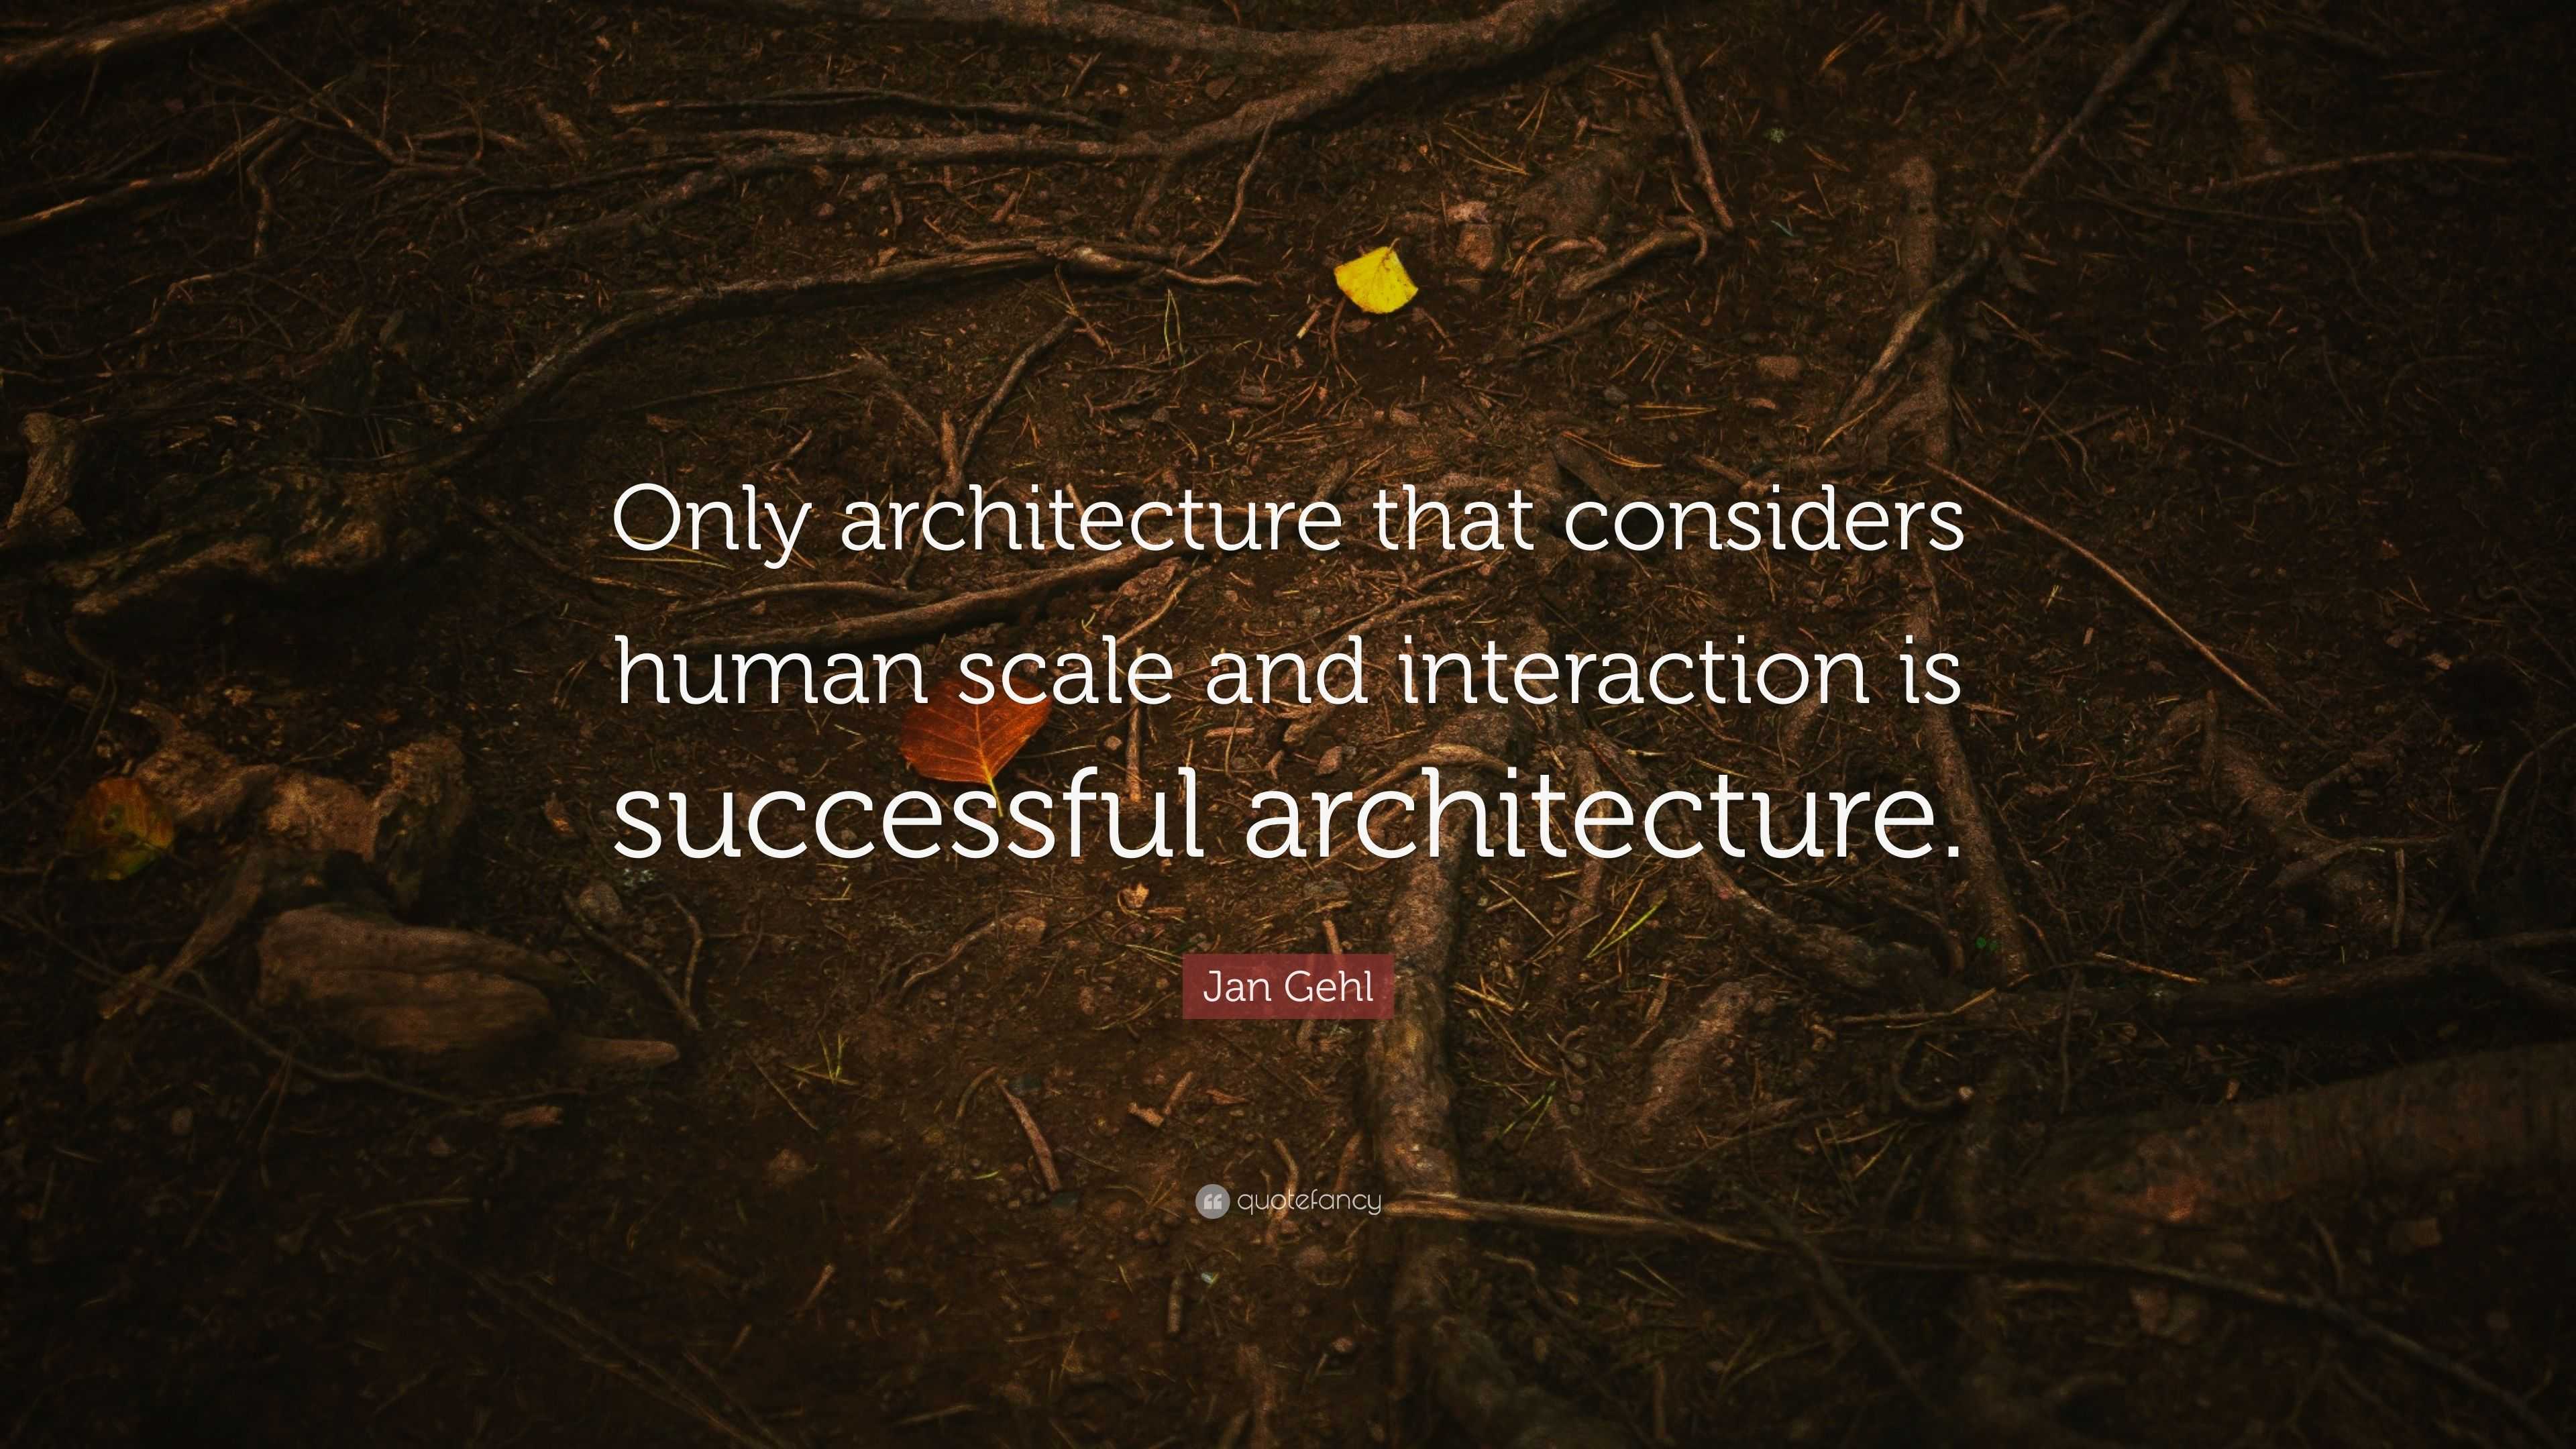 Jan Gehl Quote: “Only architecture that considers human scale and ...